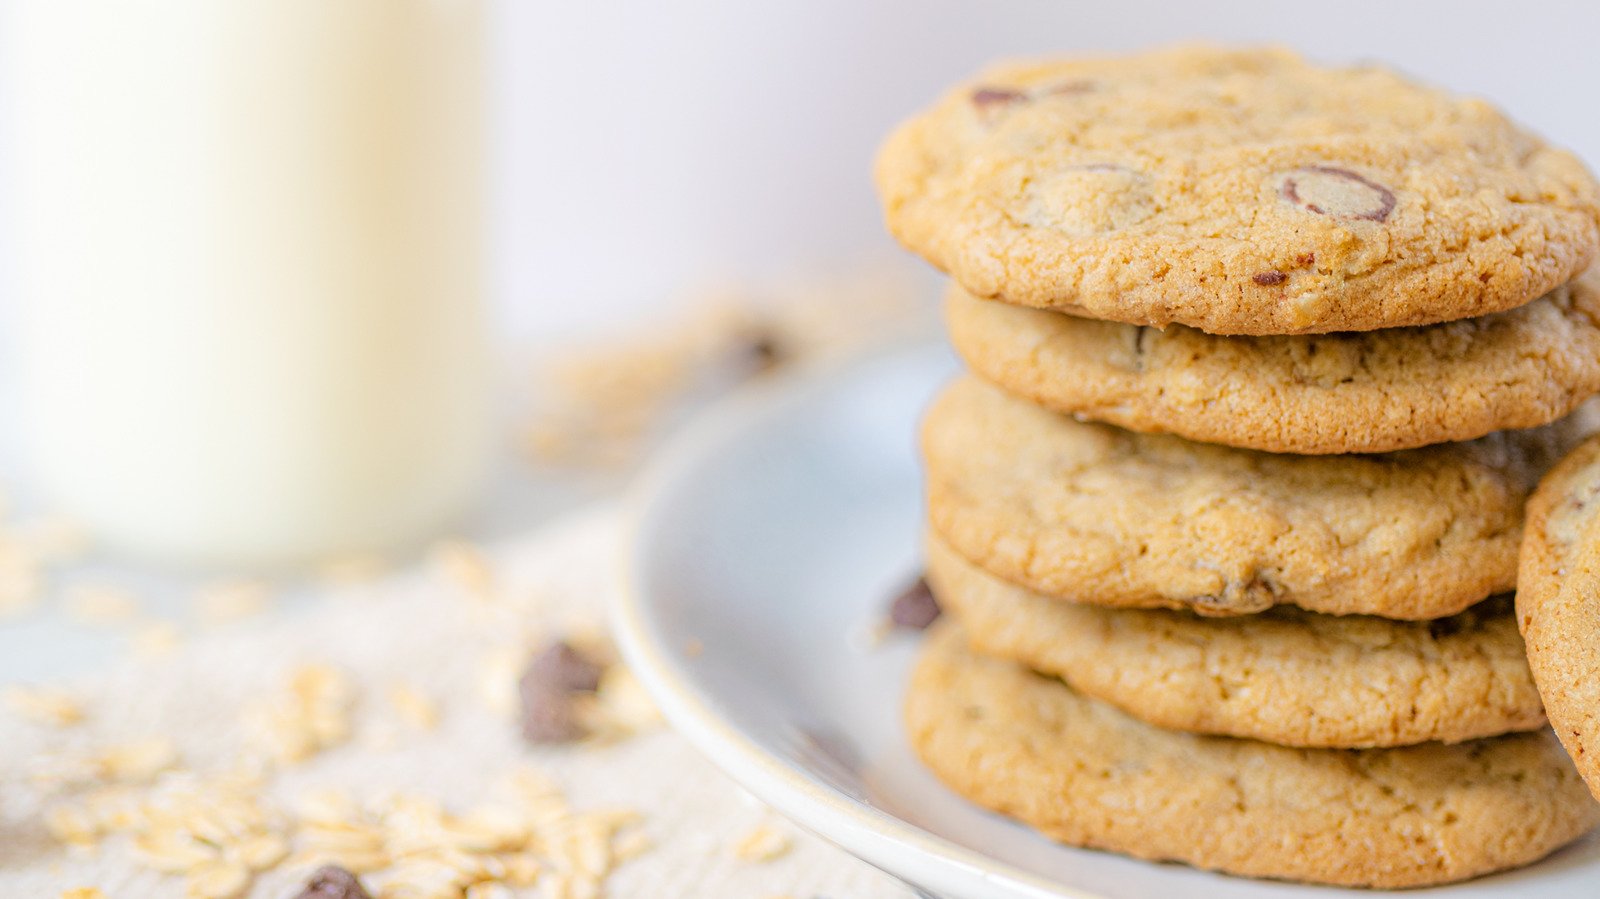 Oatmeal Chocolate Chip Cookie Recipe - Mashed